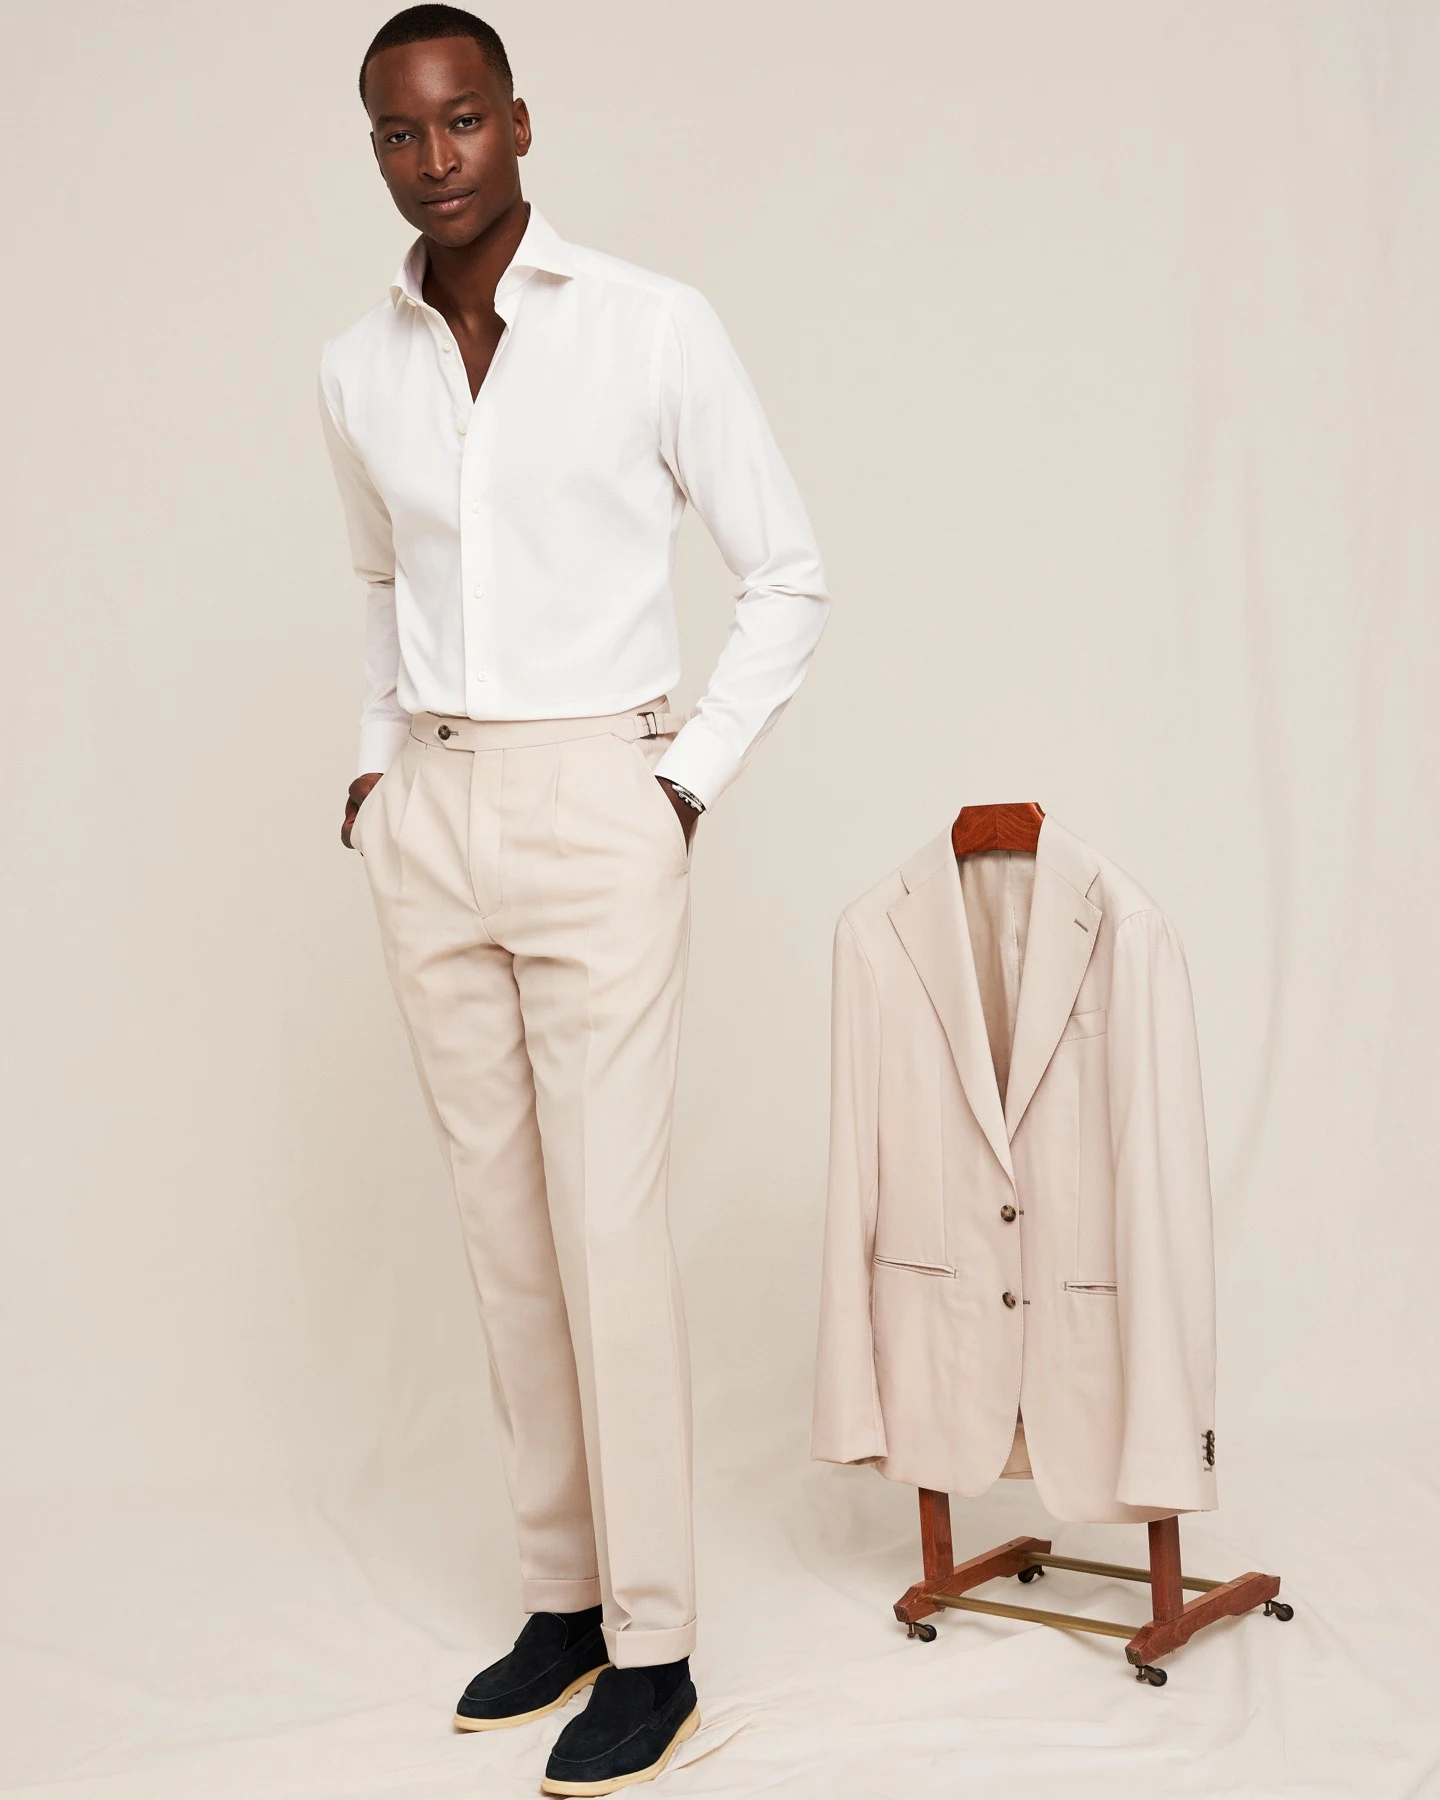 eton archive shirt beige and beige trousers on model